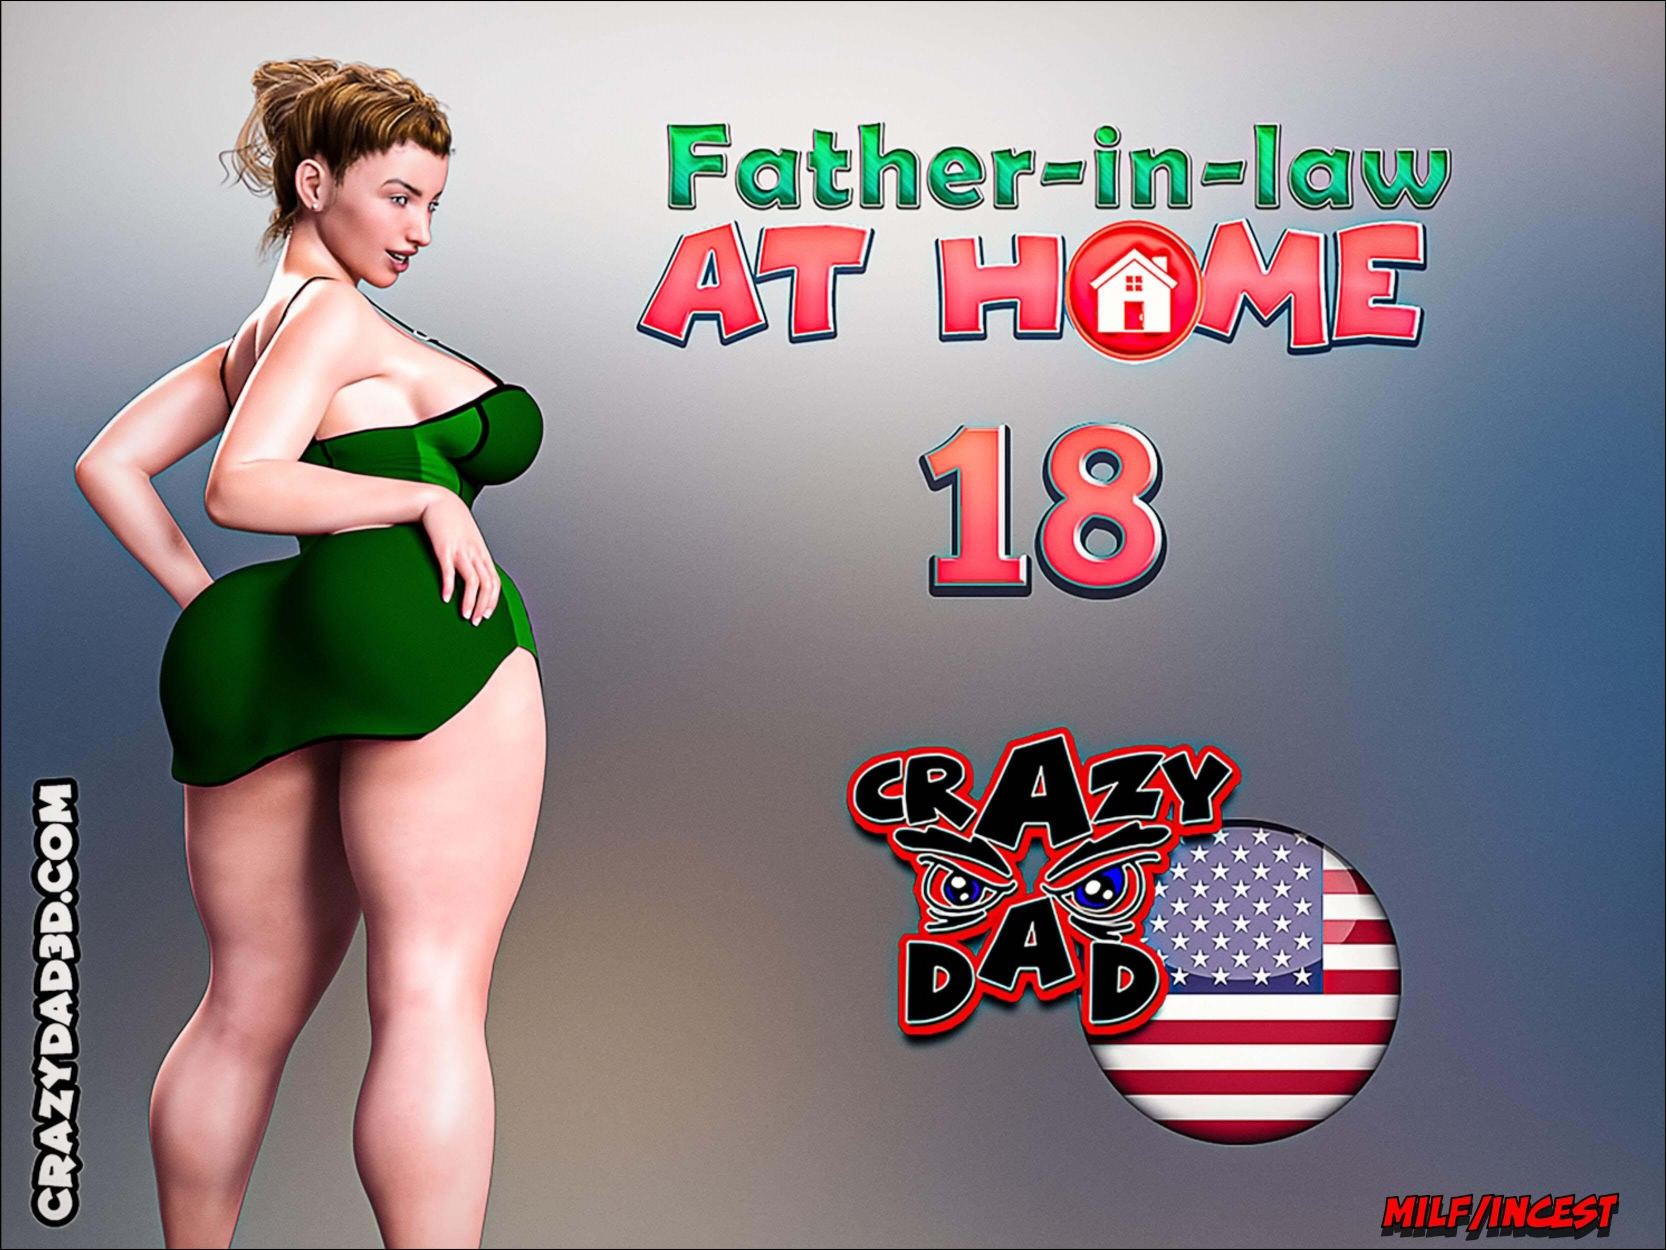 Dad In Law - Crazy Dad 3d â€“ Father-in-law at home 18 - TeenSpiritHentai